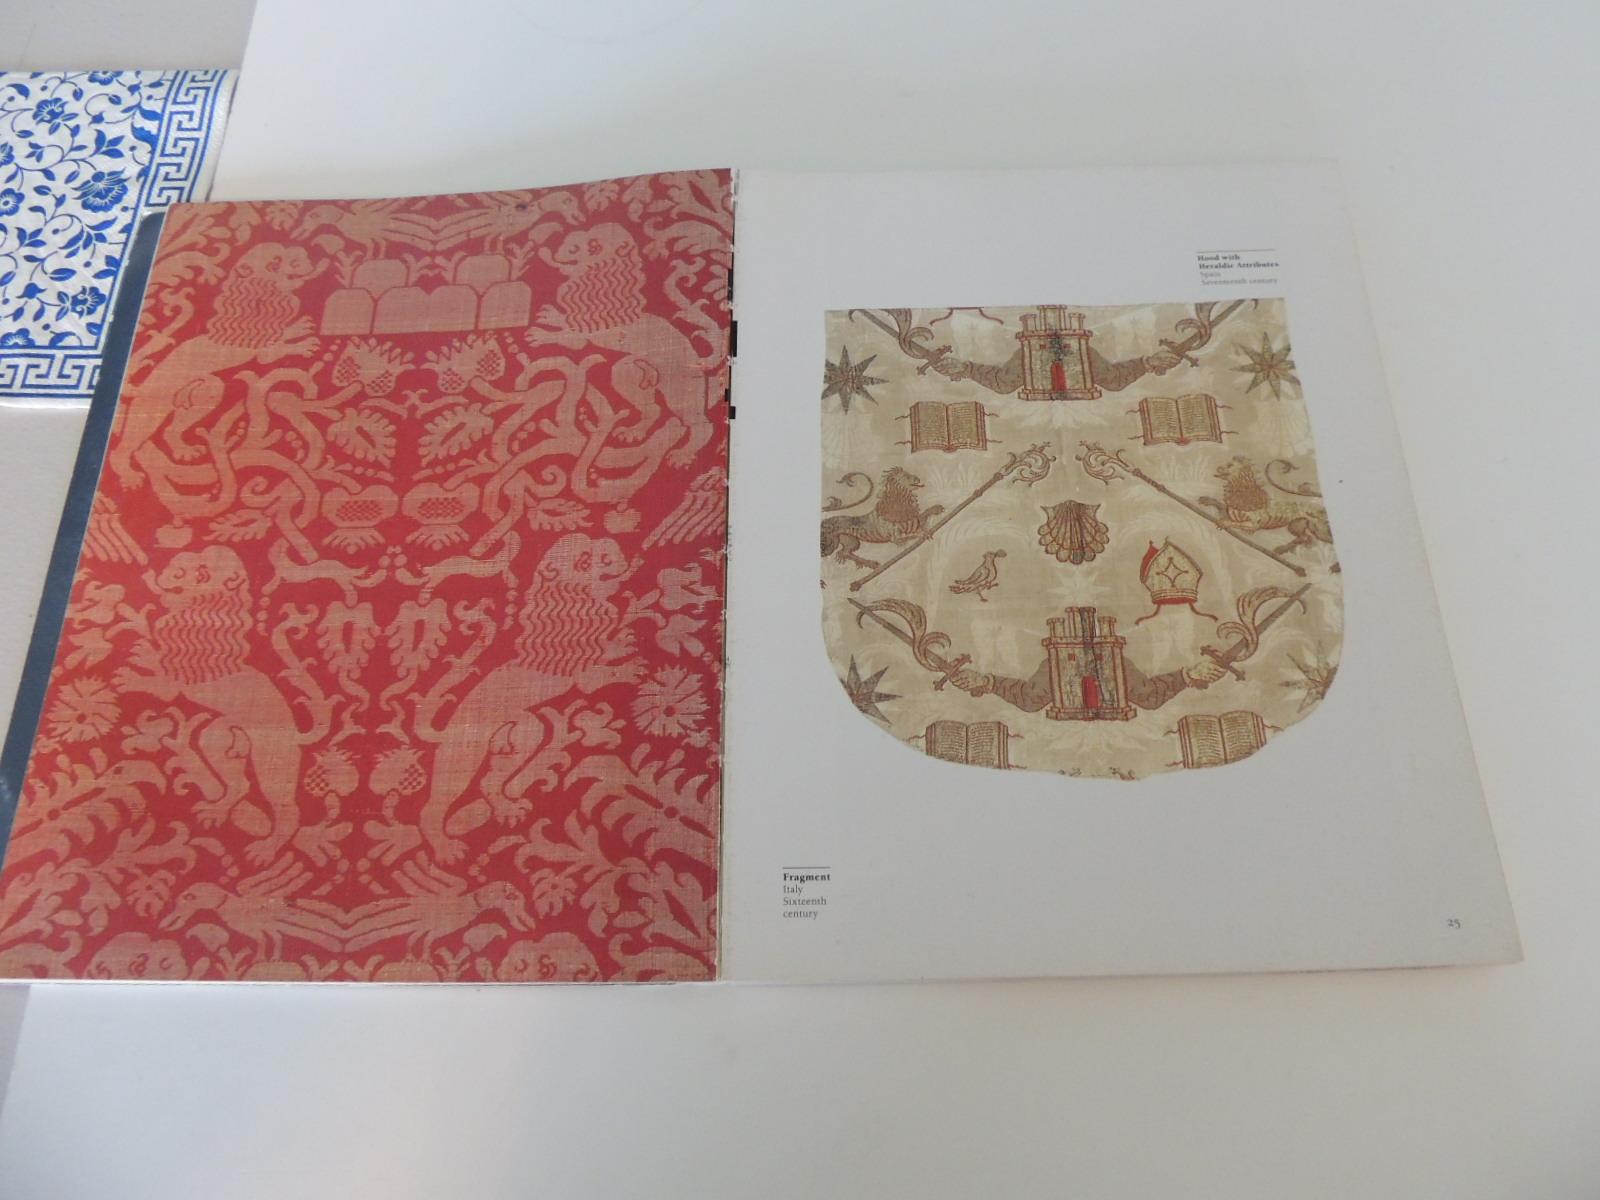 Textiles by The Art Institute of Chicago vintage soft cover book
Works of lace, woven silk, velvet and other fine fabrics are among the masterpieces showcased in this book, an overview of textile art spanning 15 centuries. The author takes the